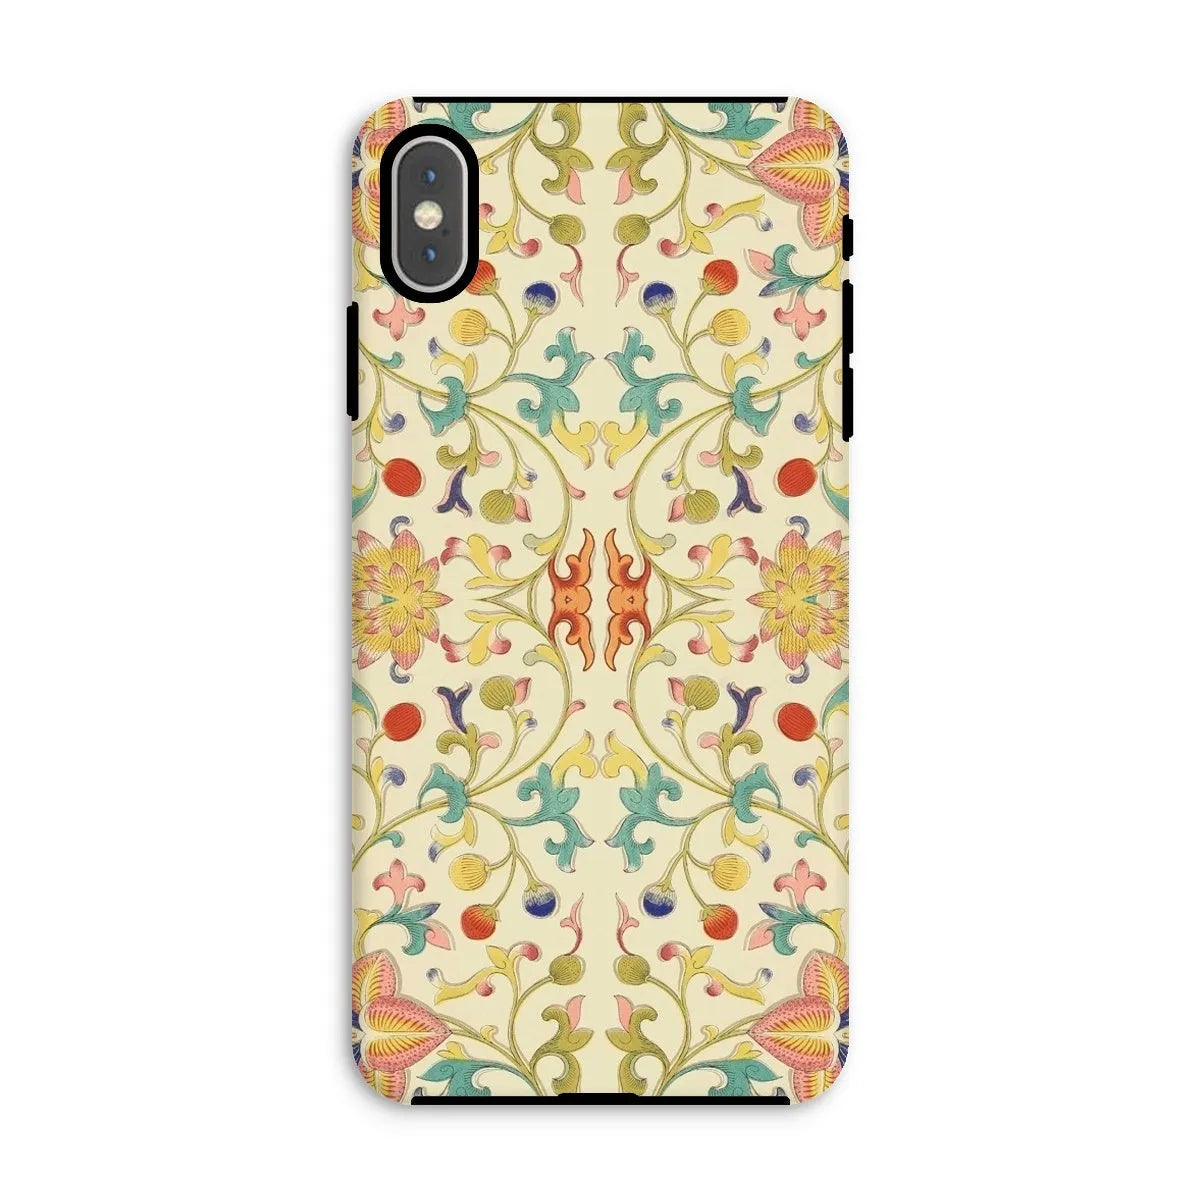 Over The Rainbow - Chinoiserie Pattern Art Phone Case - Iphone Xs Max / Matte - Mobile Phone Cases - Aesthetic Art